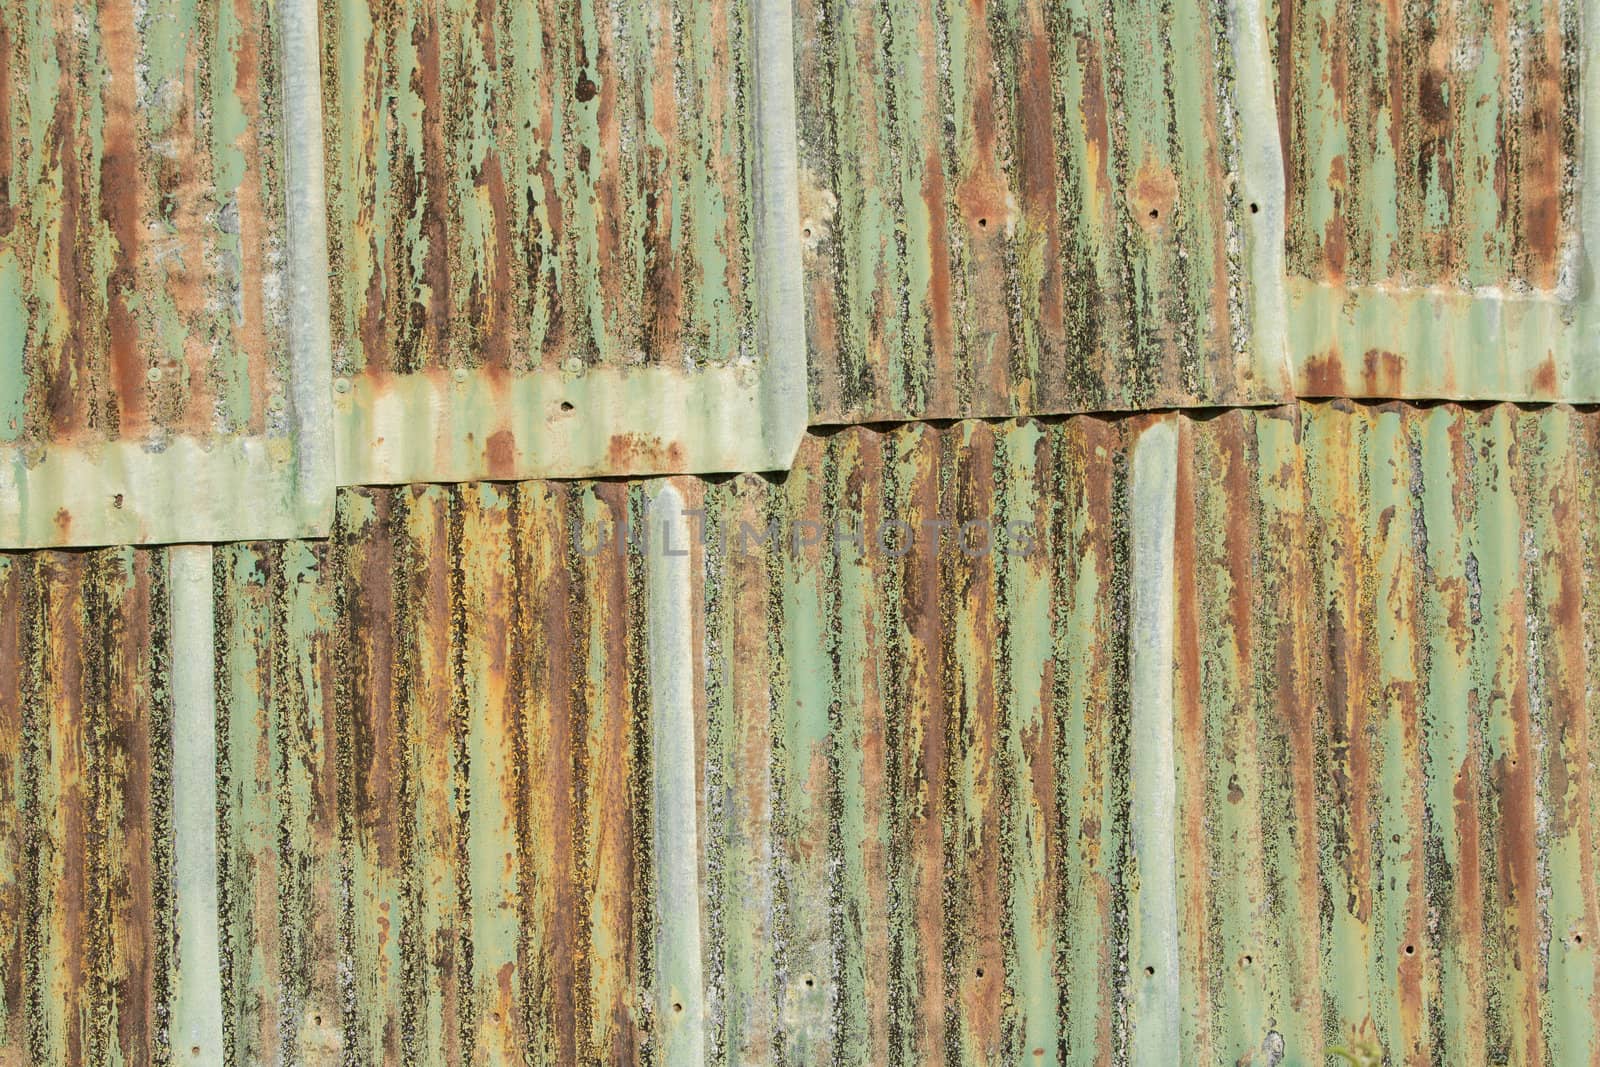 A background of metal sheets overlapping with various shades of color paint and rust.